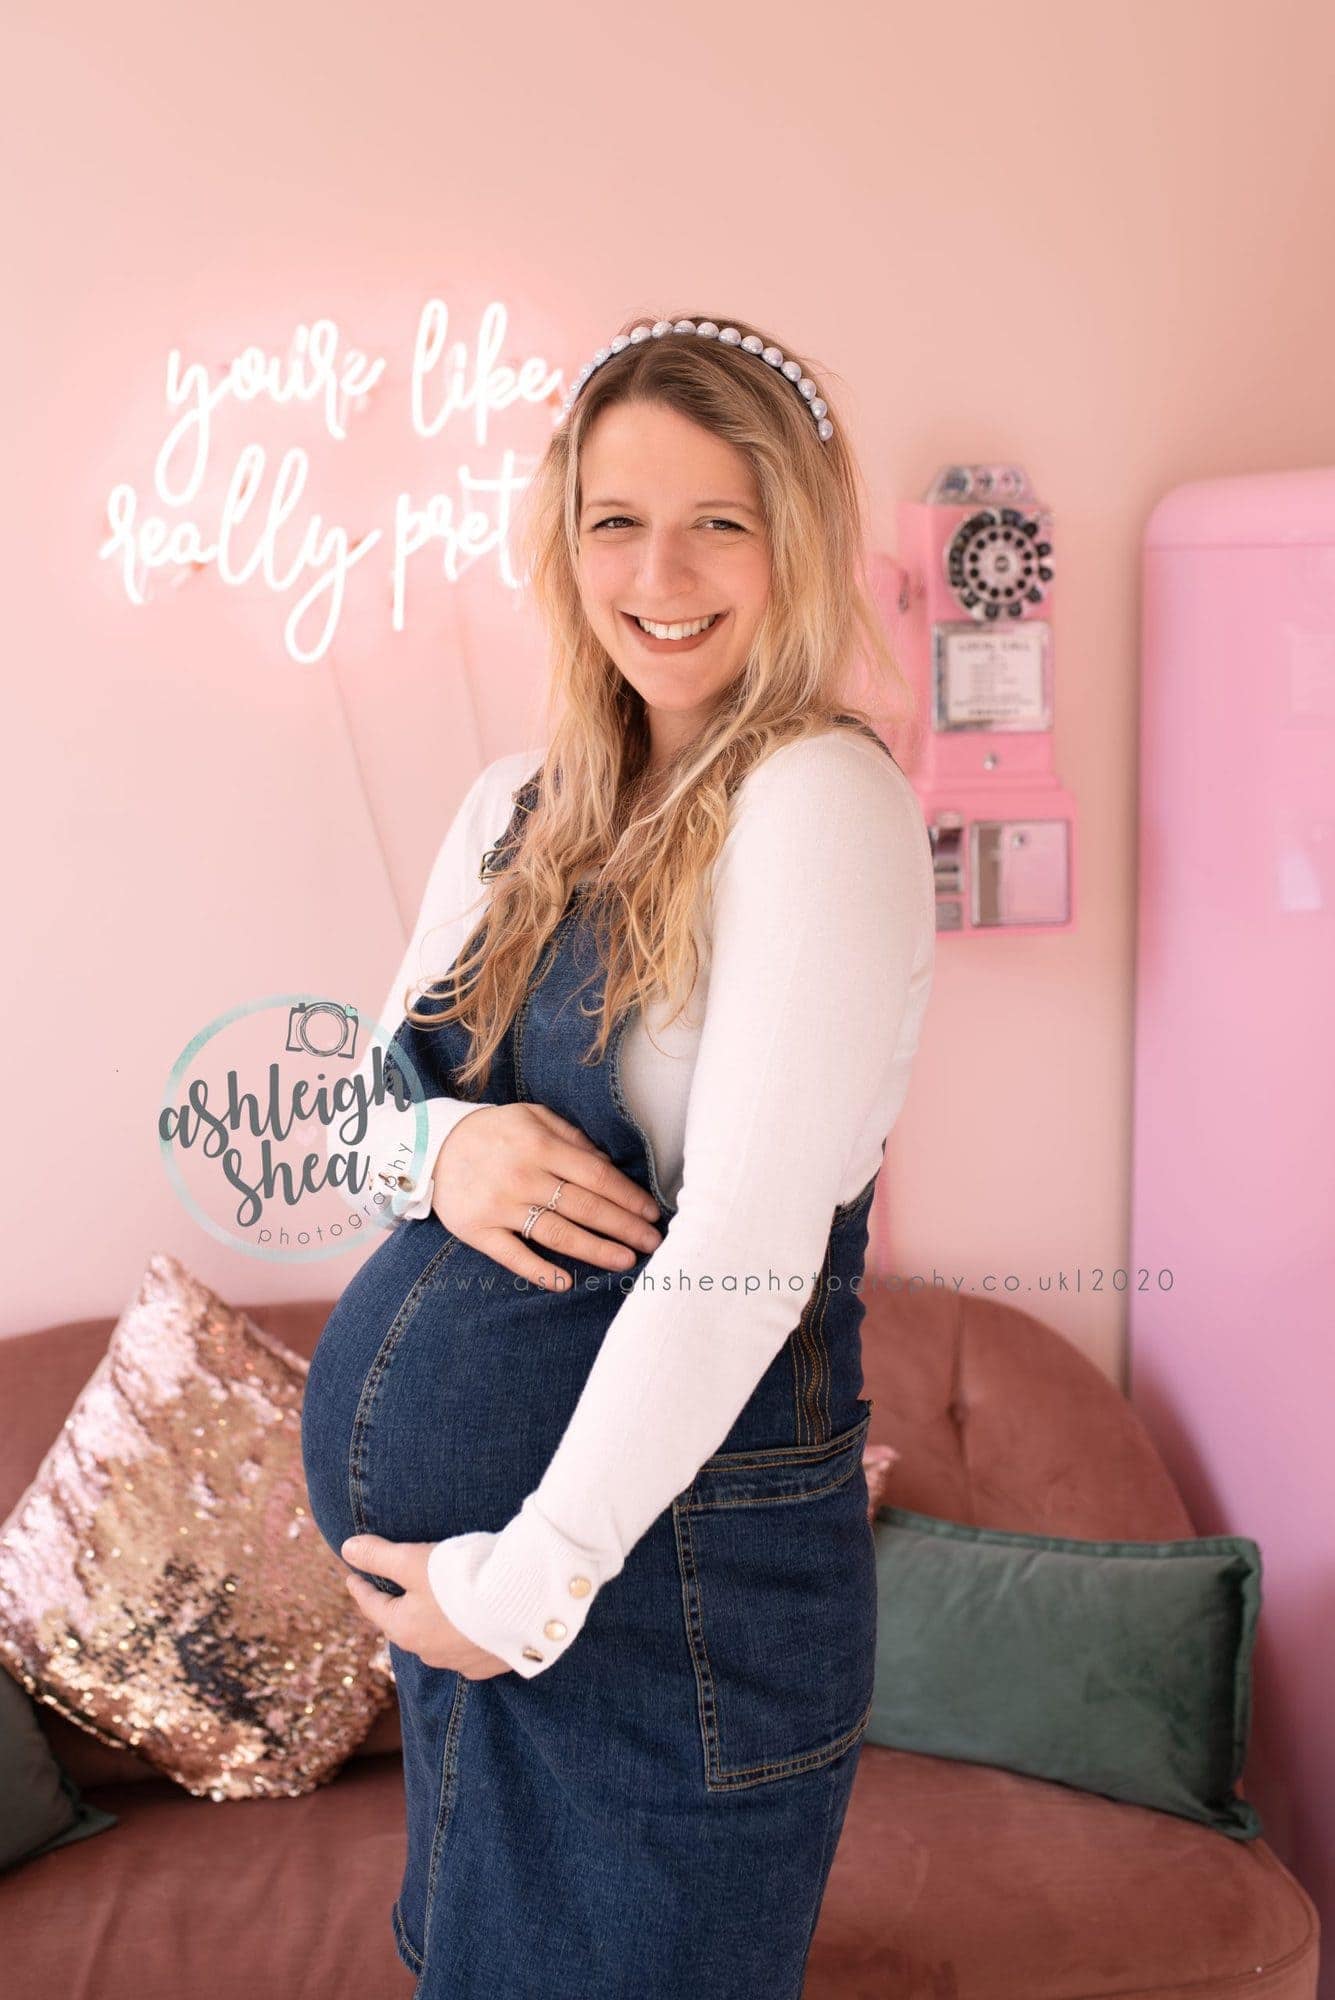 Baby Love, Mum To Be, Maternity Portraits, Pregnancy Photos, Pregnant, Ashleigh Shea Photography, Blend Make Up London, Bromley, Sidcup, London,Kent